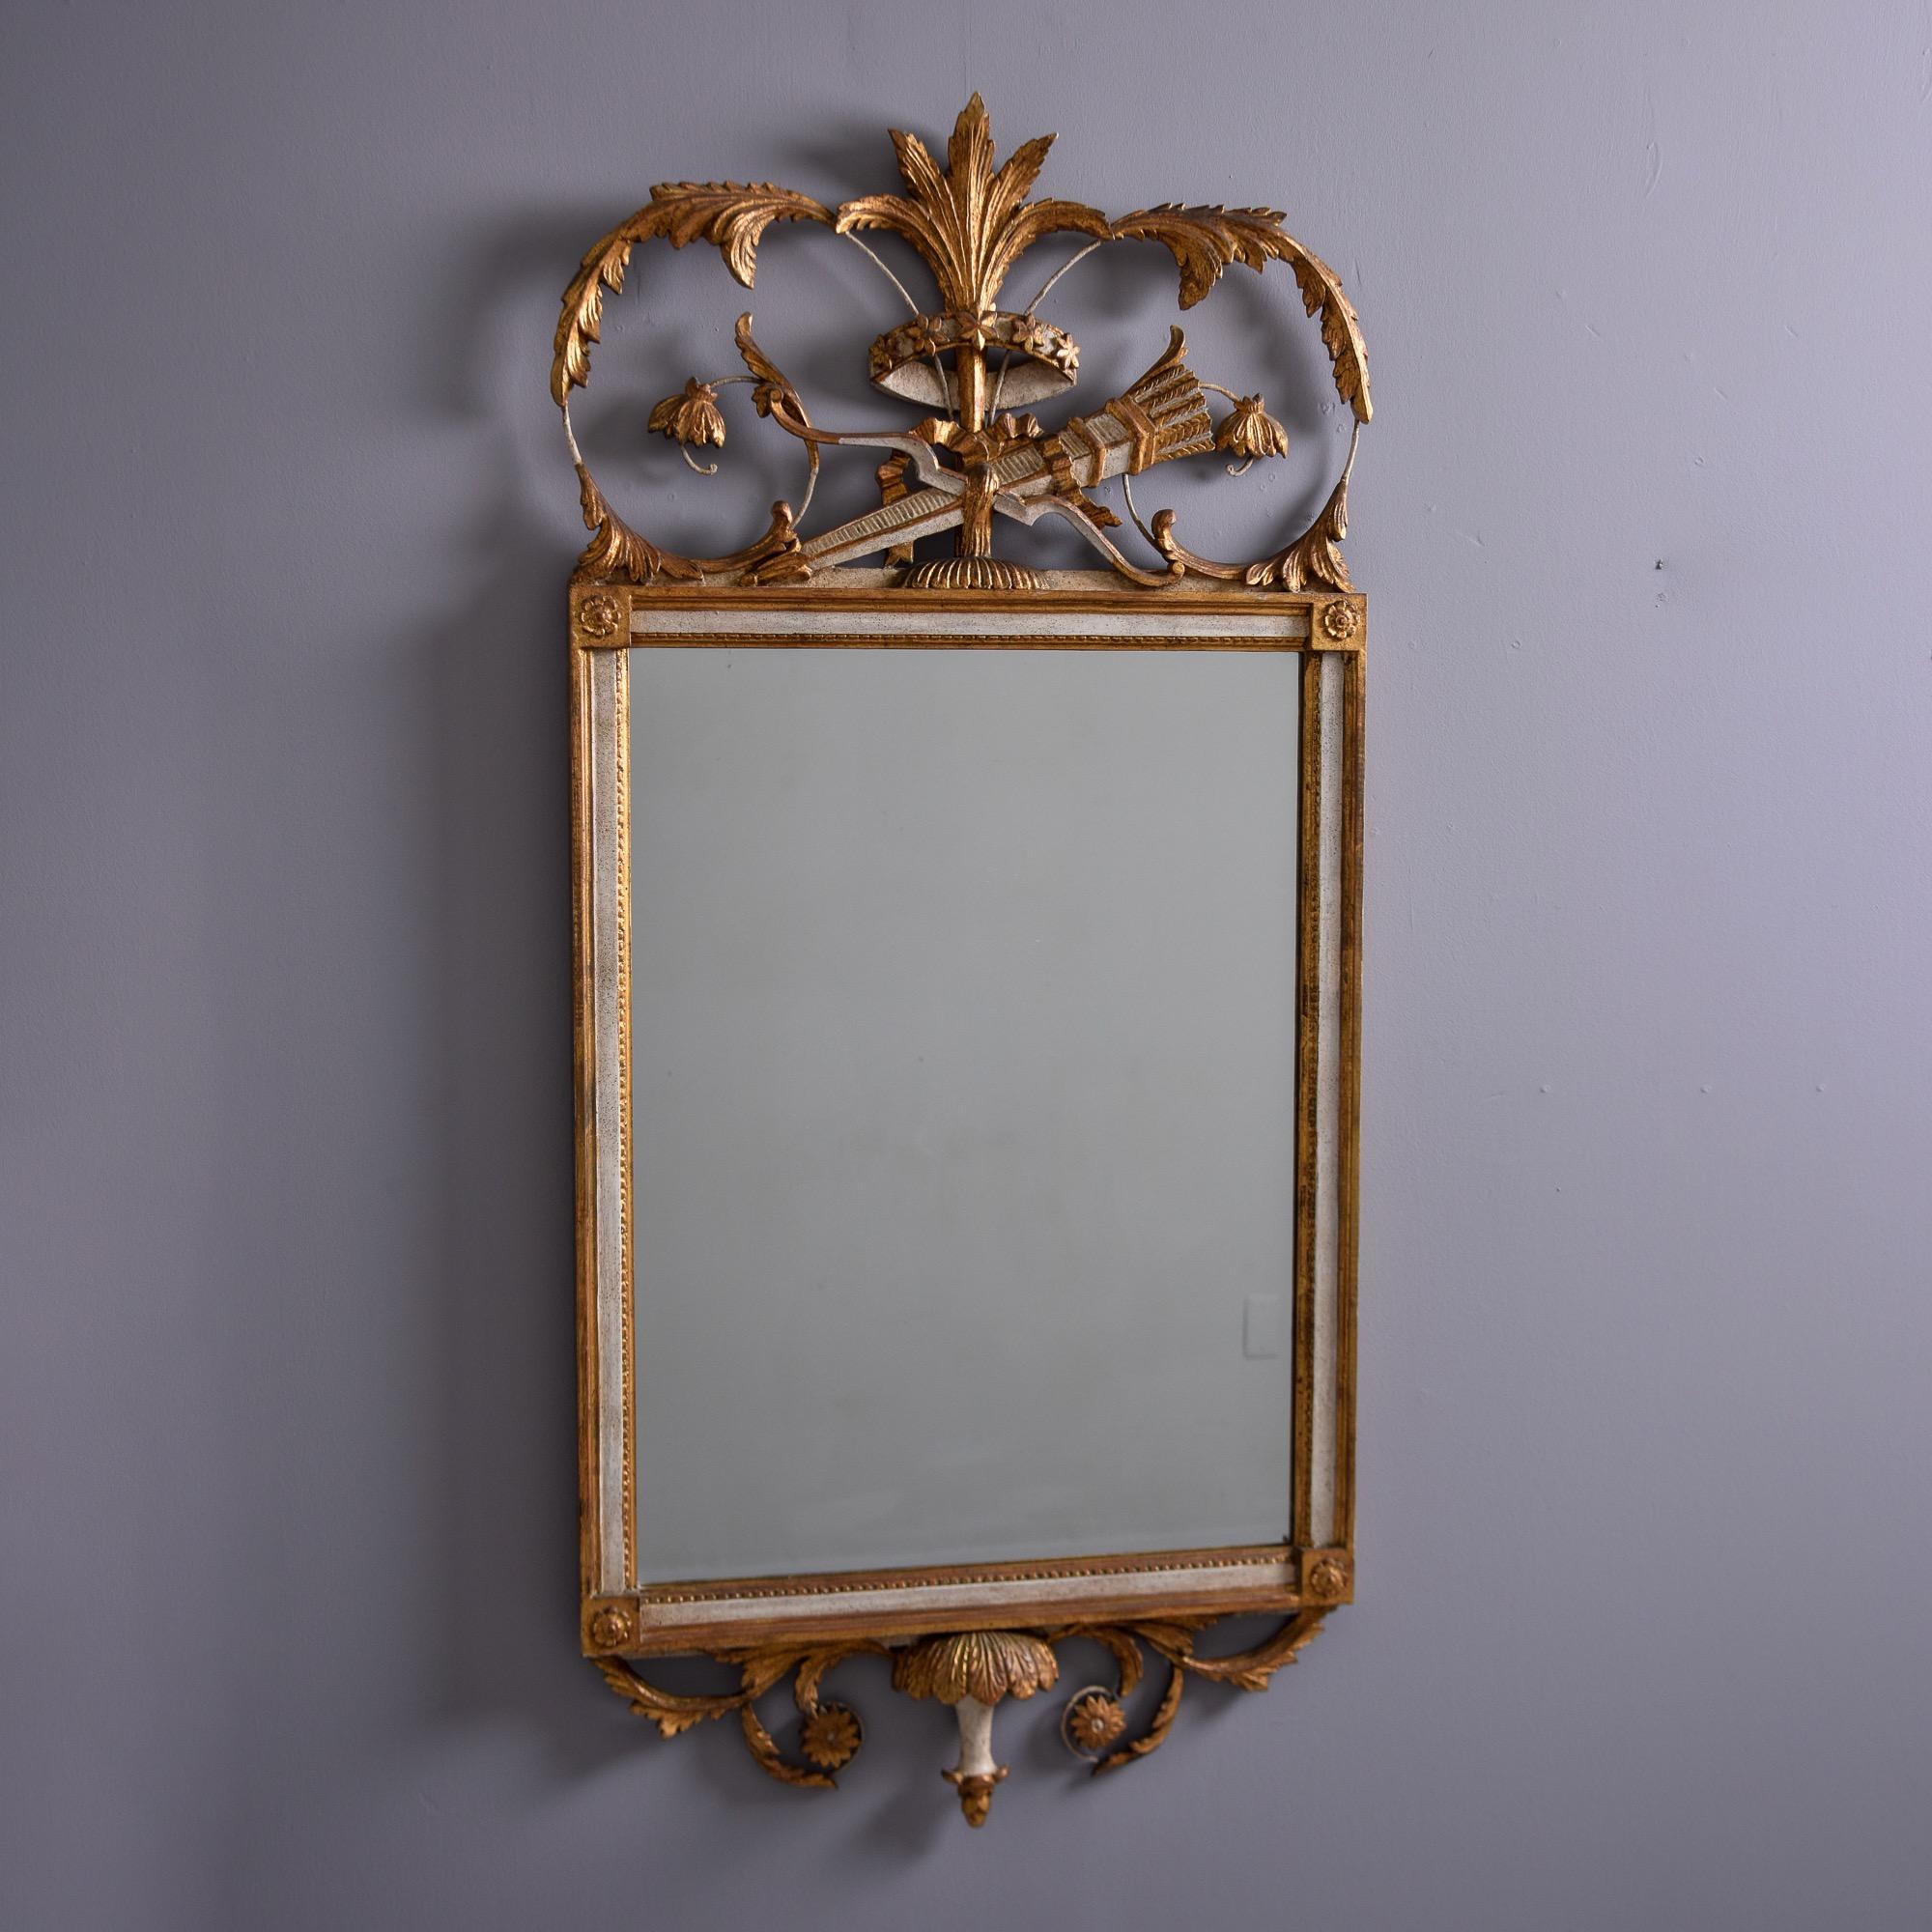 Found in the US, this circa 1950s decorative mirror features a gilt and cream wooden frame with an ornate crest. Rectangular mirror features a medallion with floral motif on each corner and a tall, open work crest with acanthus leaves and a torch.